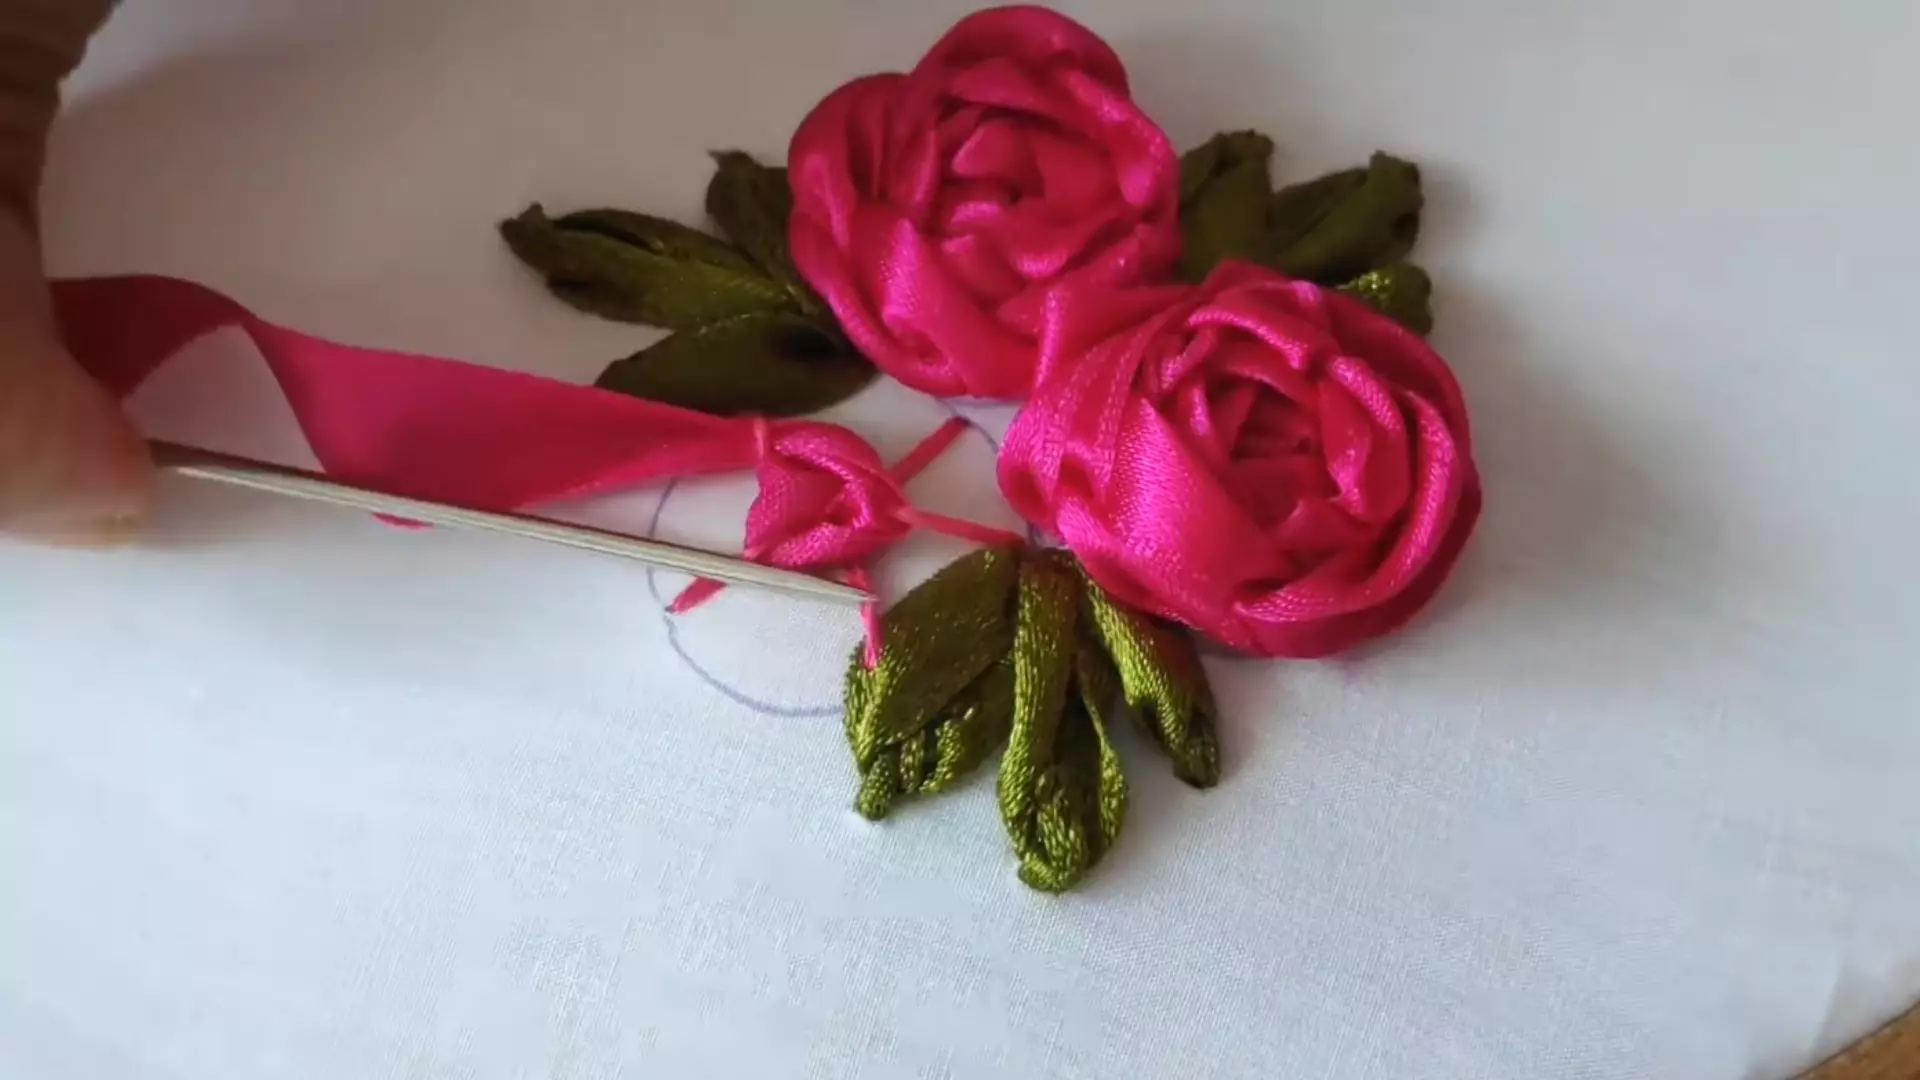 EMBROIDERY FLOWERS IN SATIN FLOWER STITCH